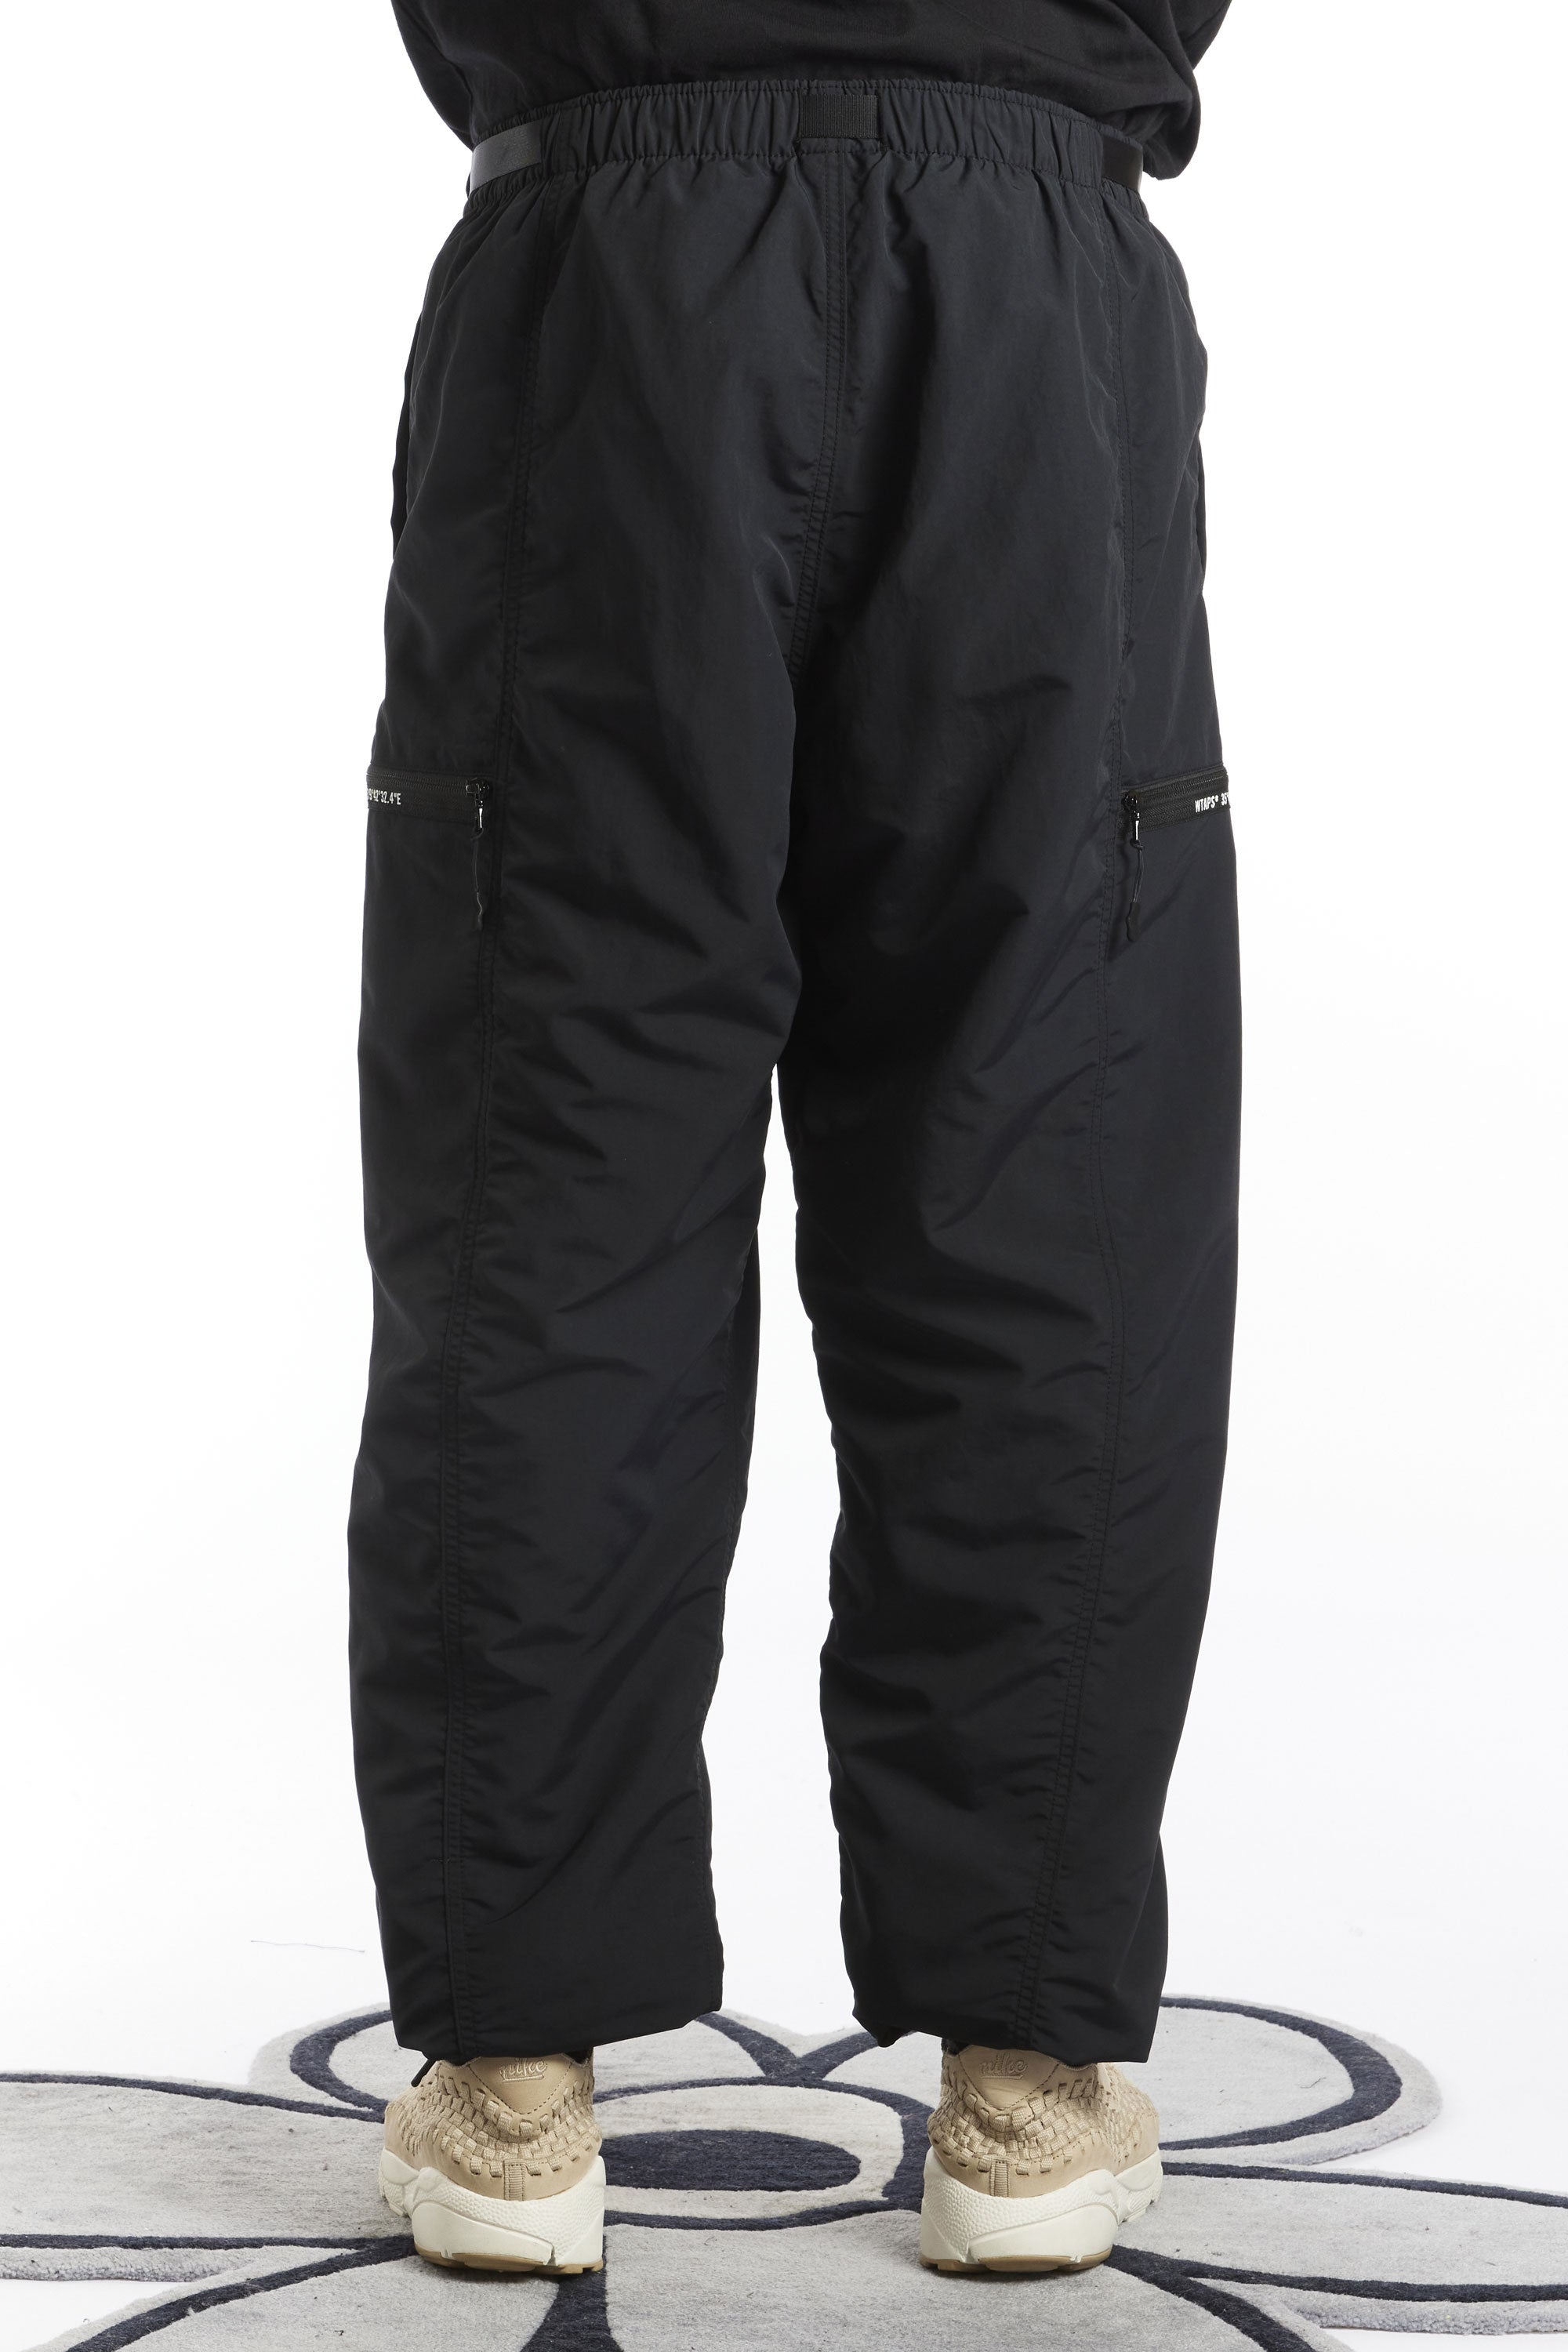 The WTAPS - SPST2003 NYLON WEATHER TRACKS  TROUSERS  available online with global shipping, and in PAM Stores Melbourne and Sydney.